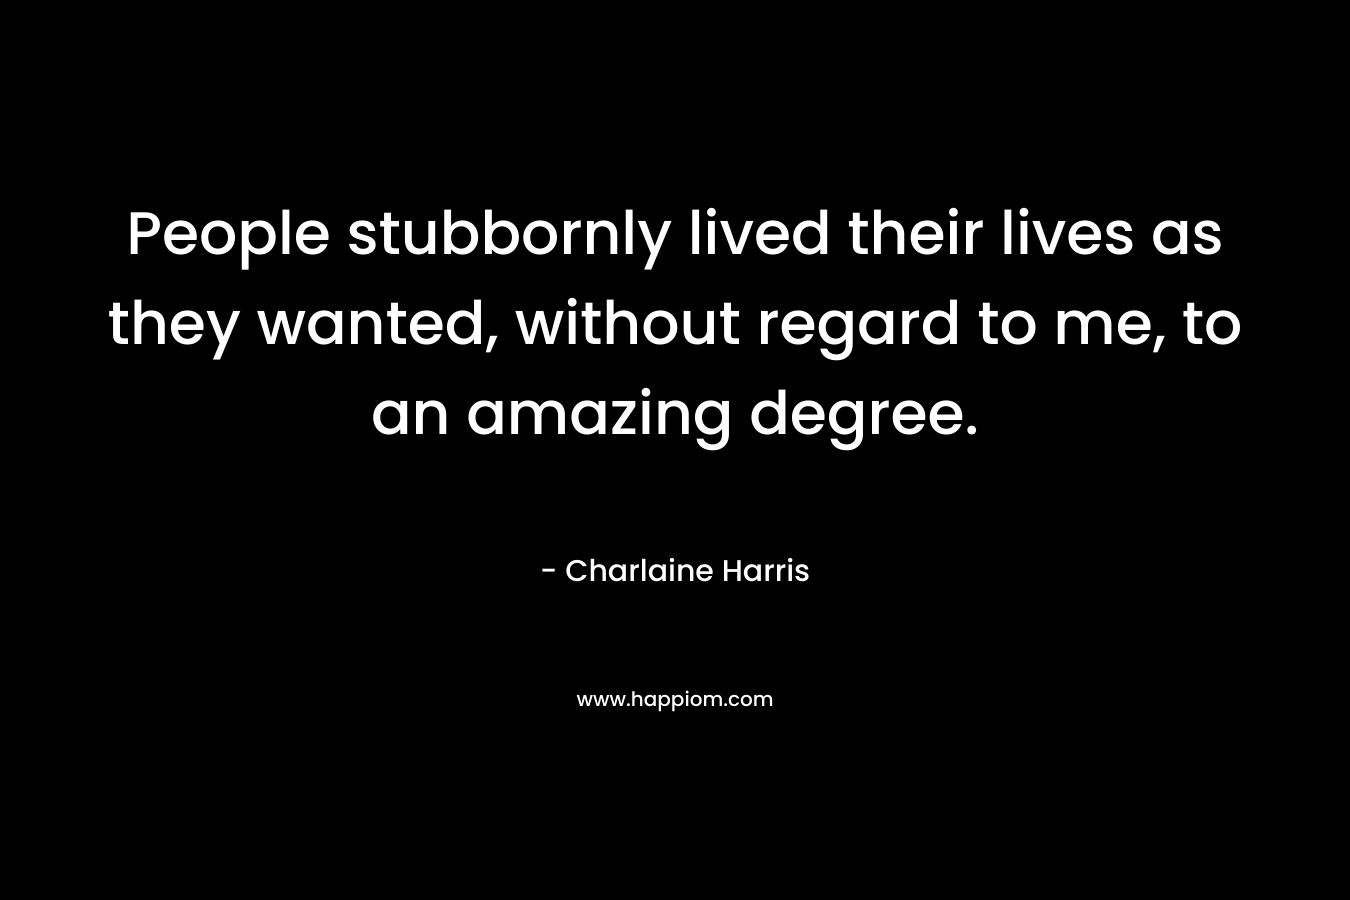 People stubbornly lived their lives as they wanted, without regard to me, to an amazing degree. – Charlaine Harris